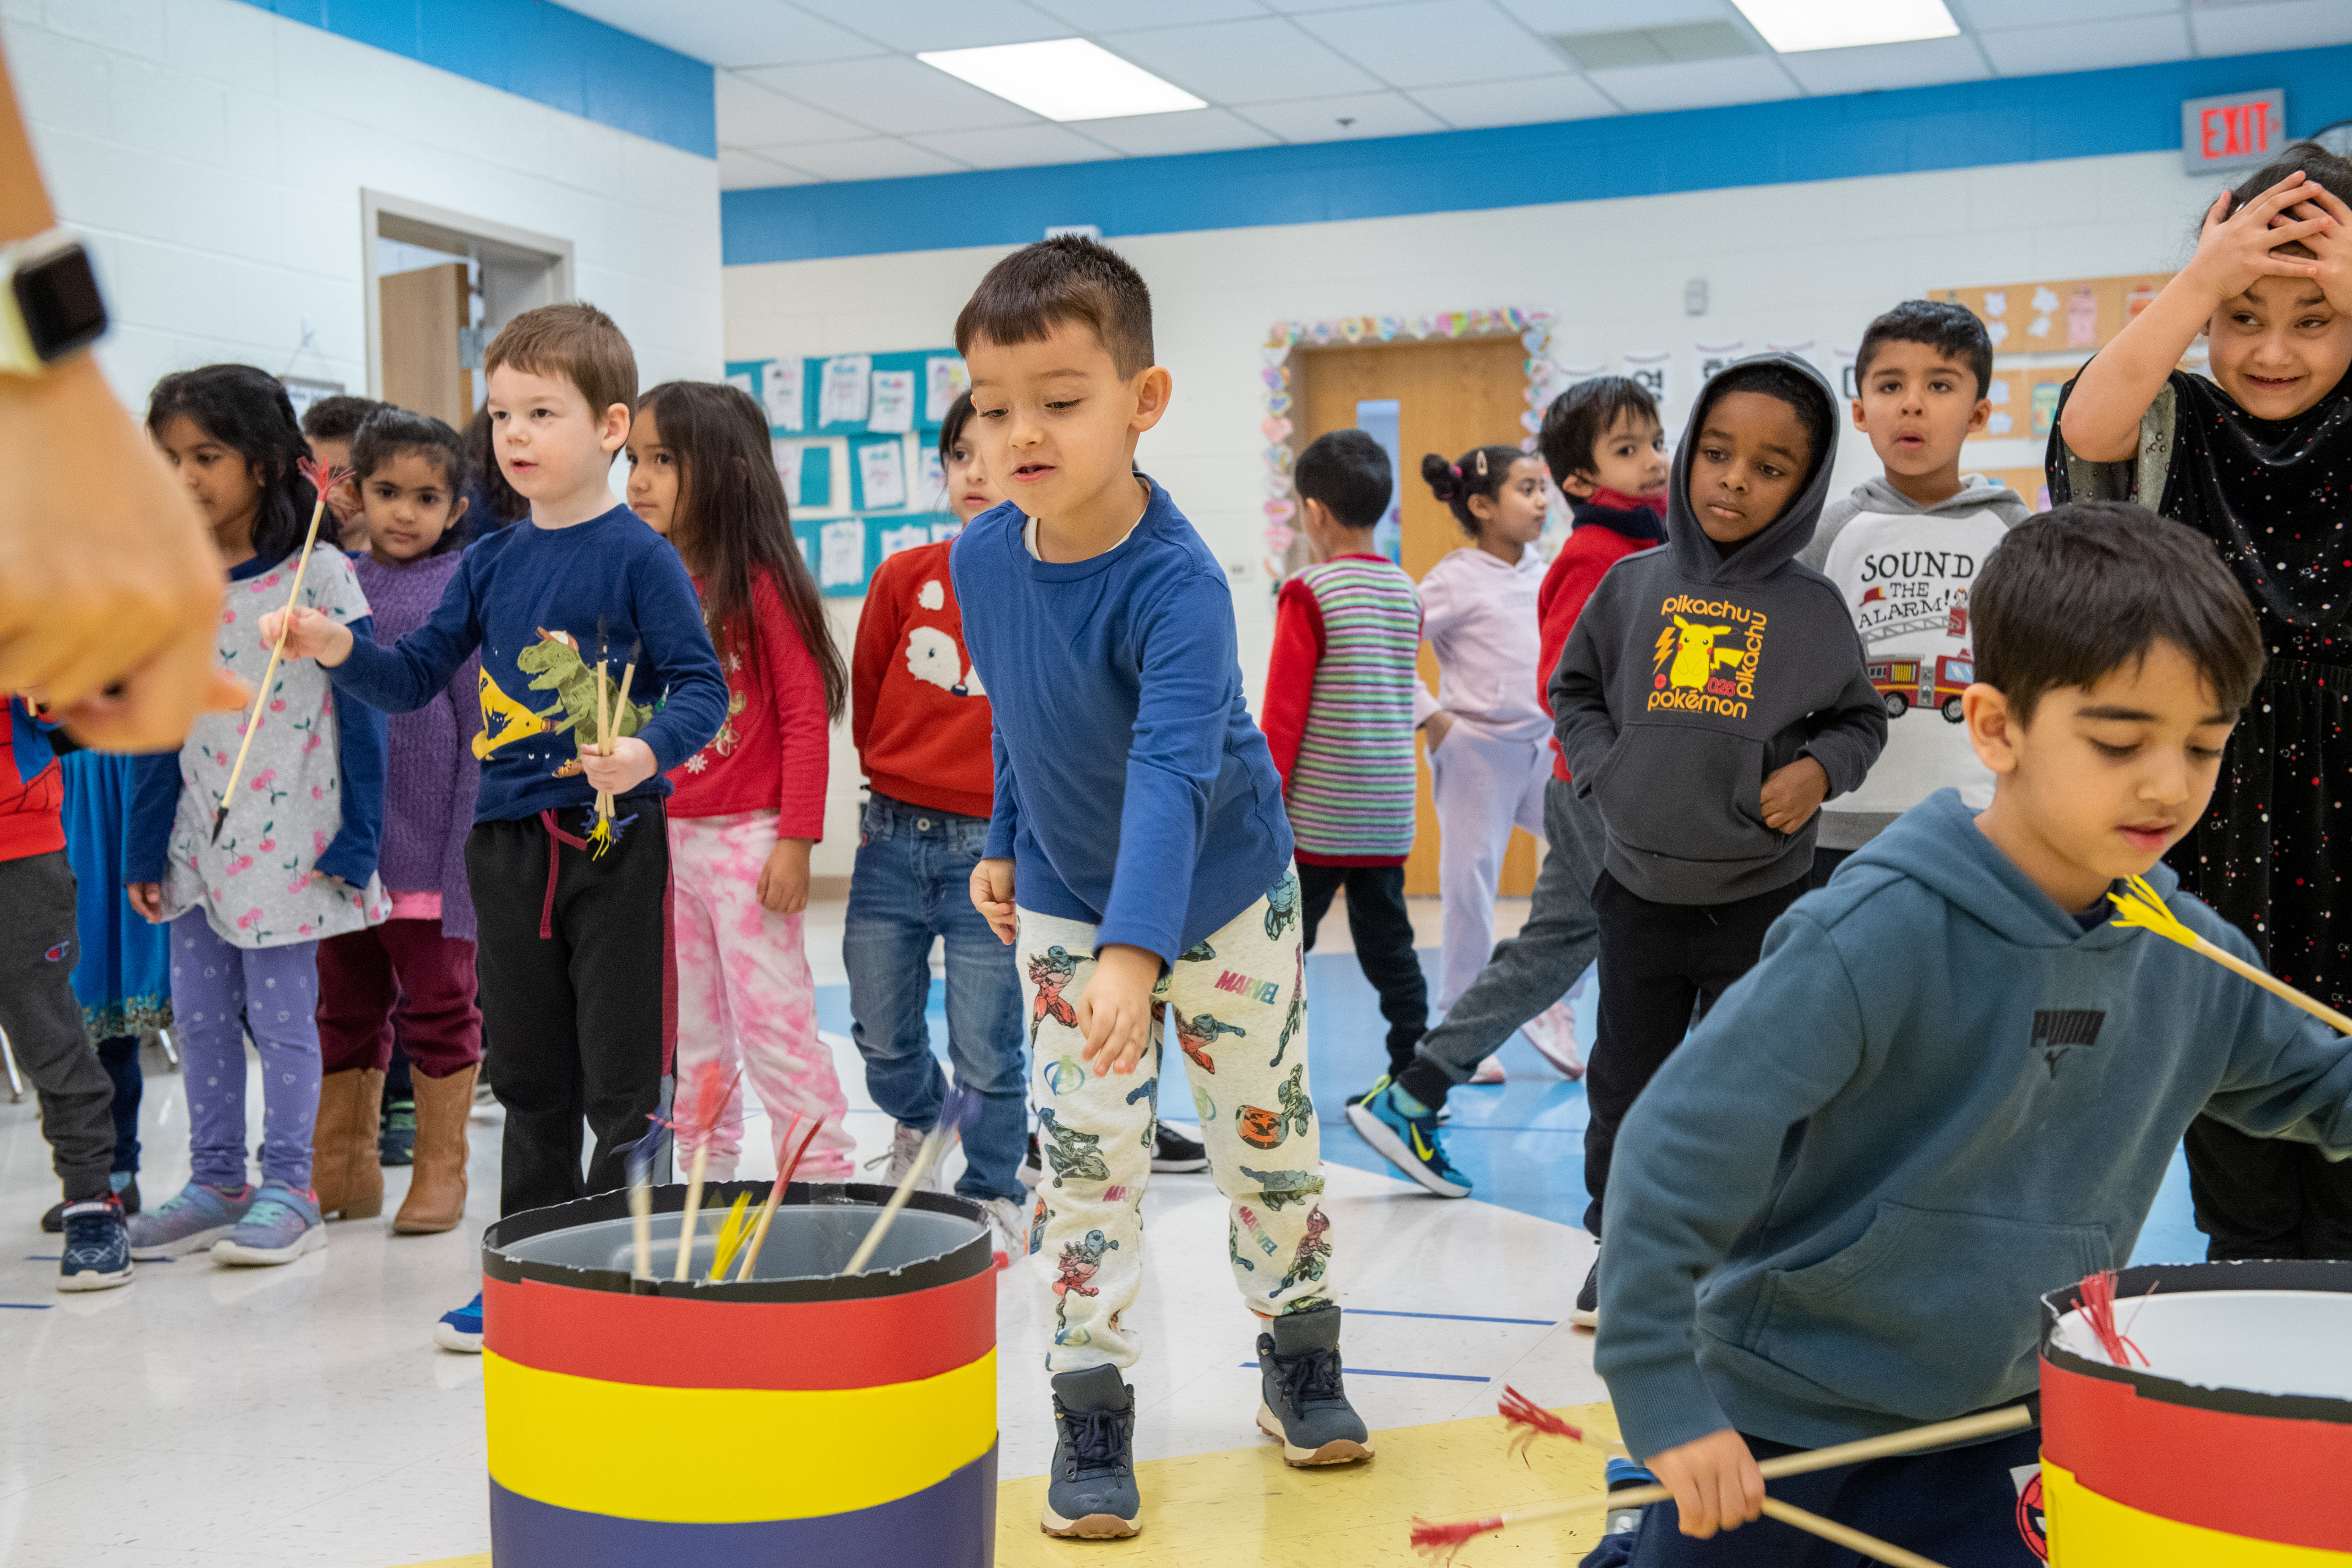 Kindergarten students play a game of throwing sticks into barrels as part of Lunar New Year festivities.